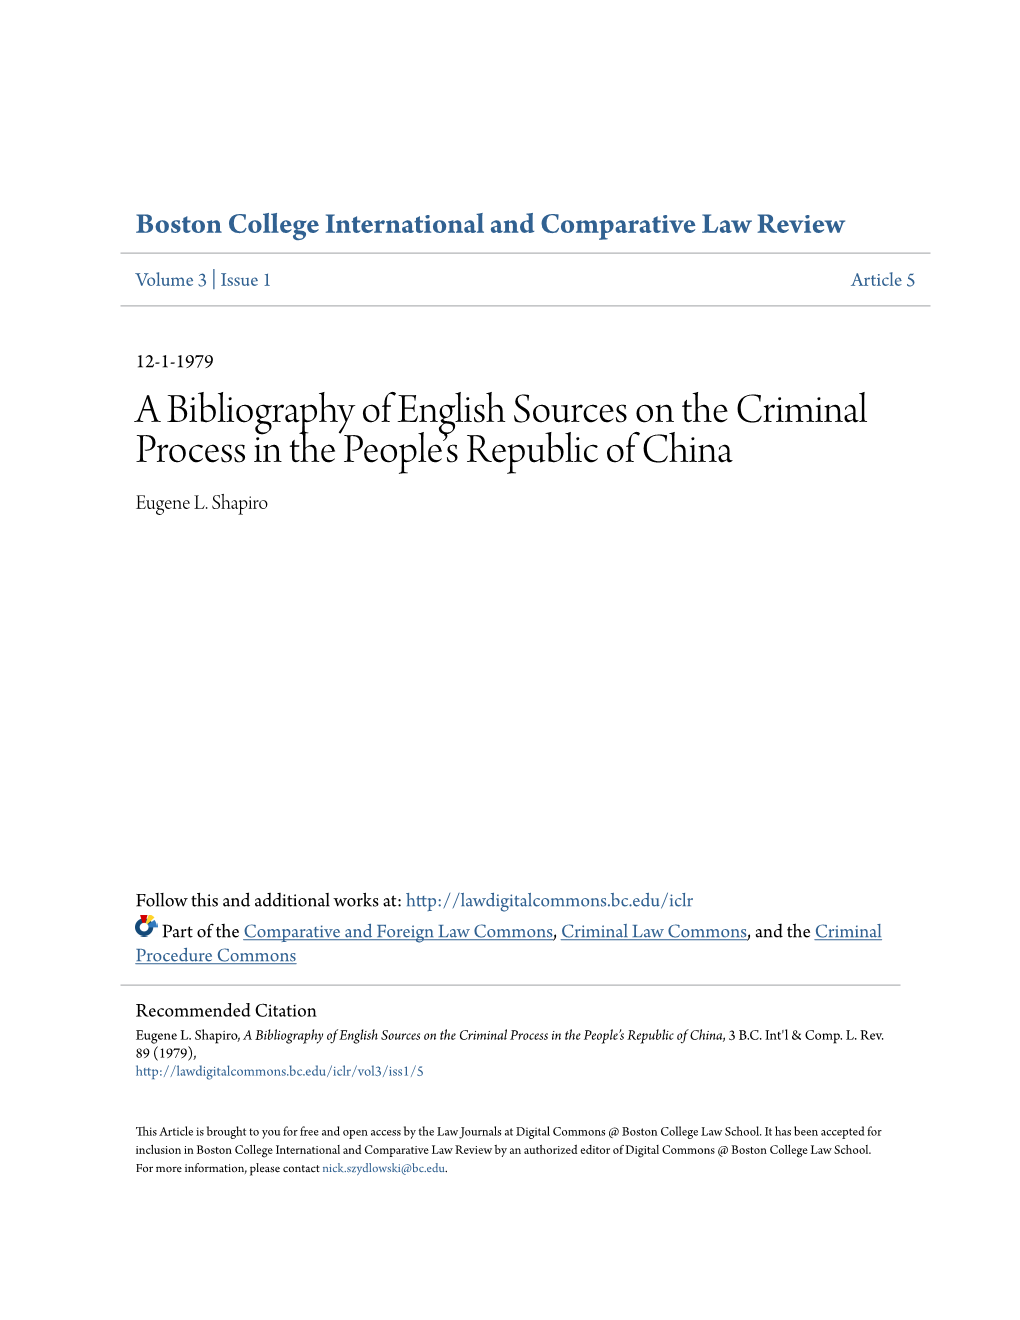 A Bibliography of English Sources on the Criminal Process in the Peopleâ